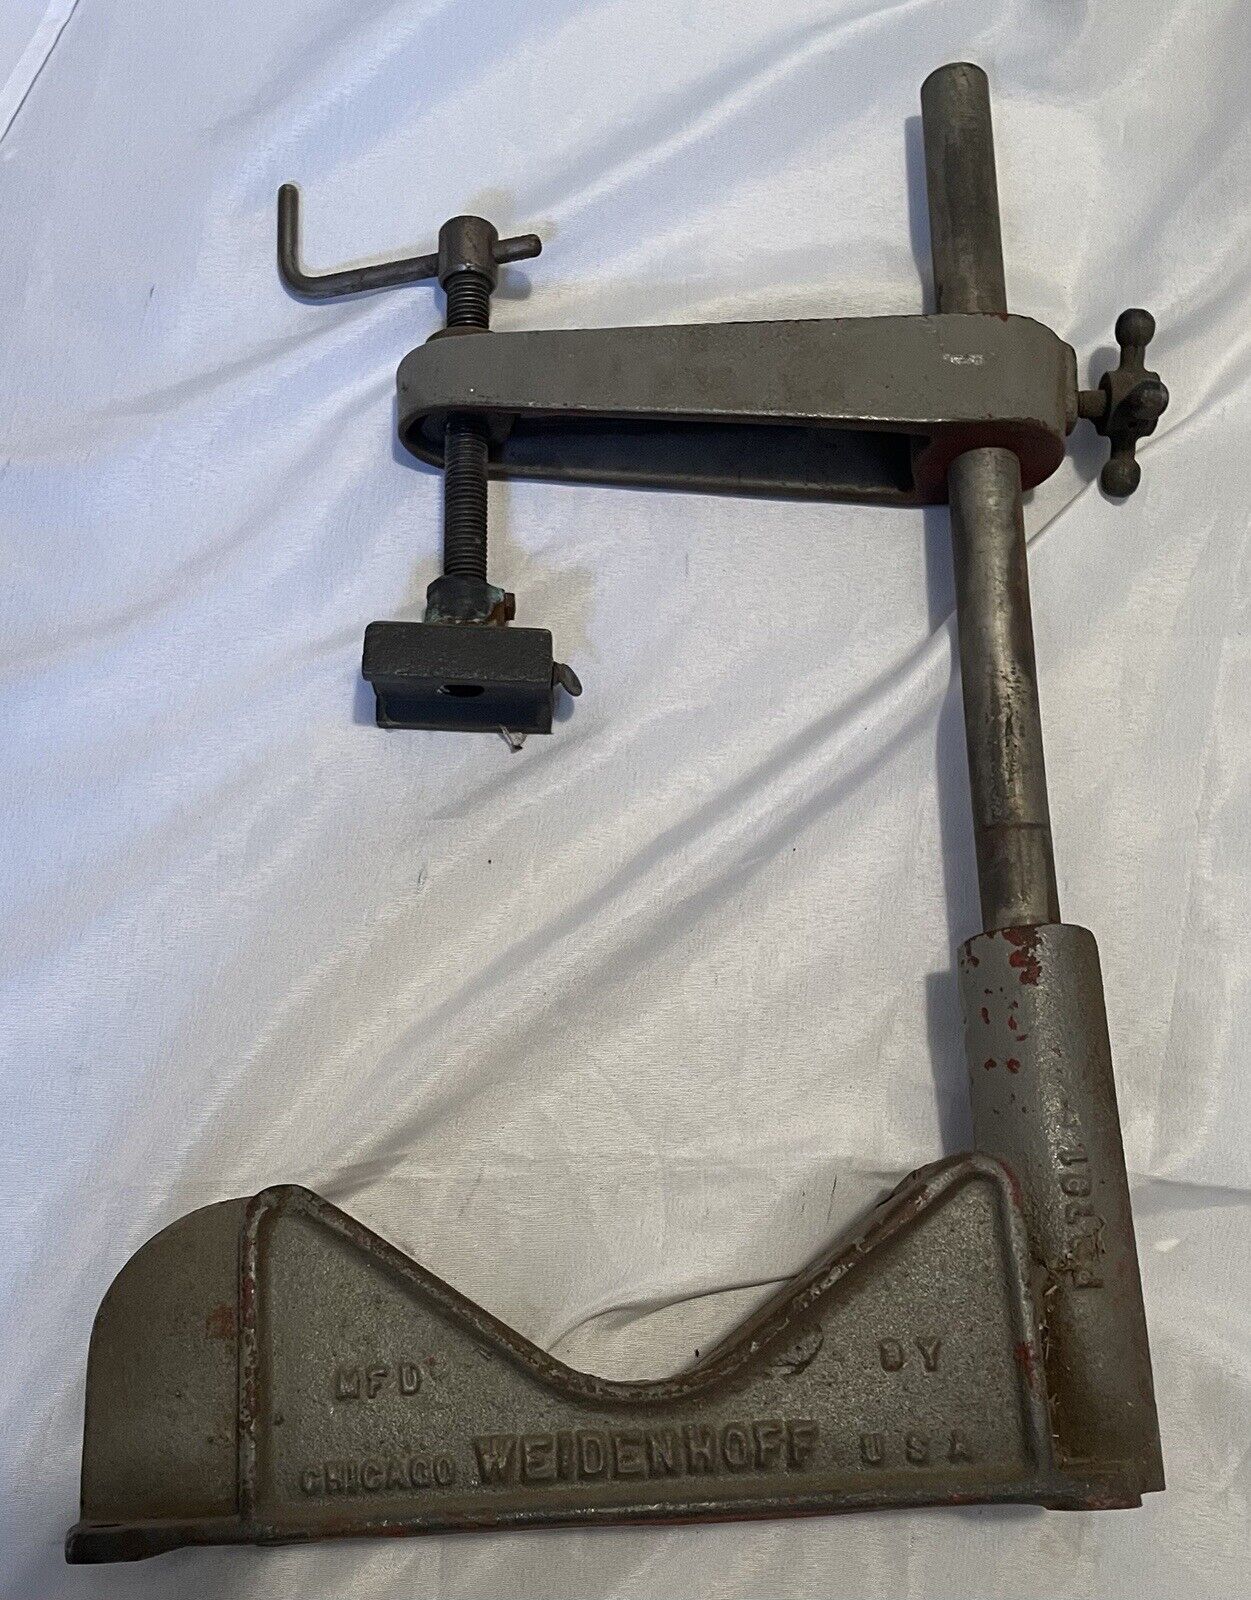 Weidenhoff Antique Vice Automotive Tool With Stand Made In USA Chicago 20” X 12”